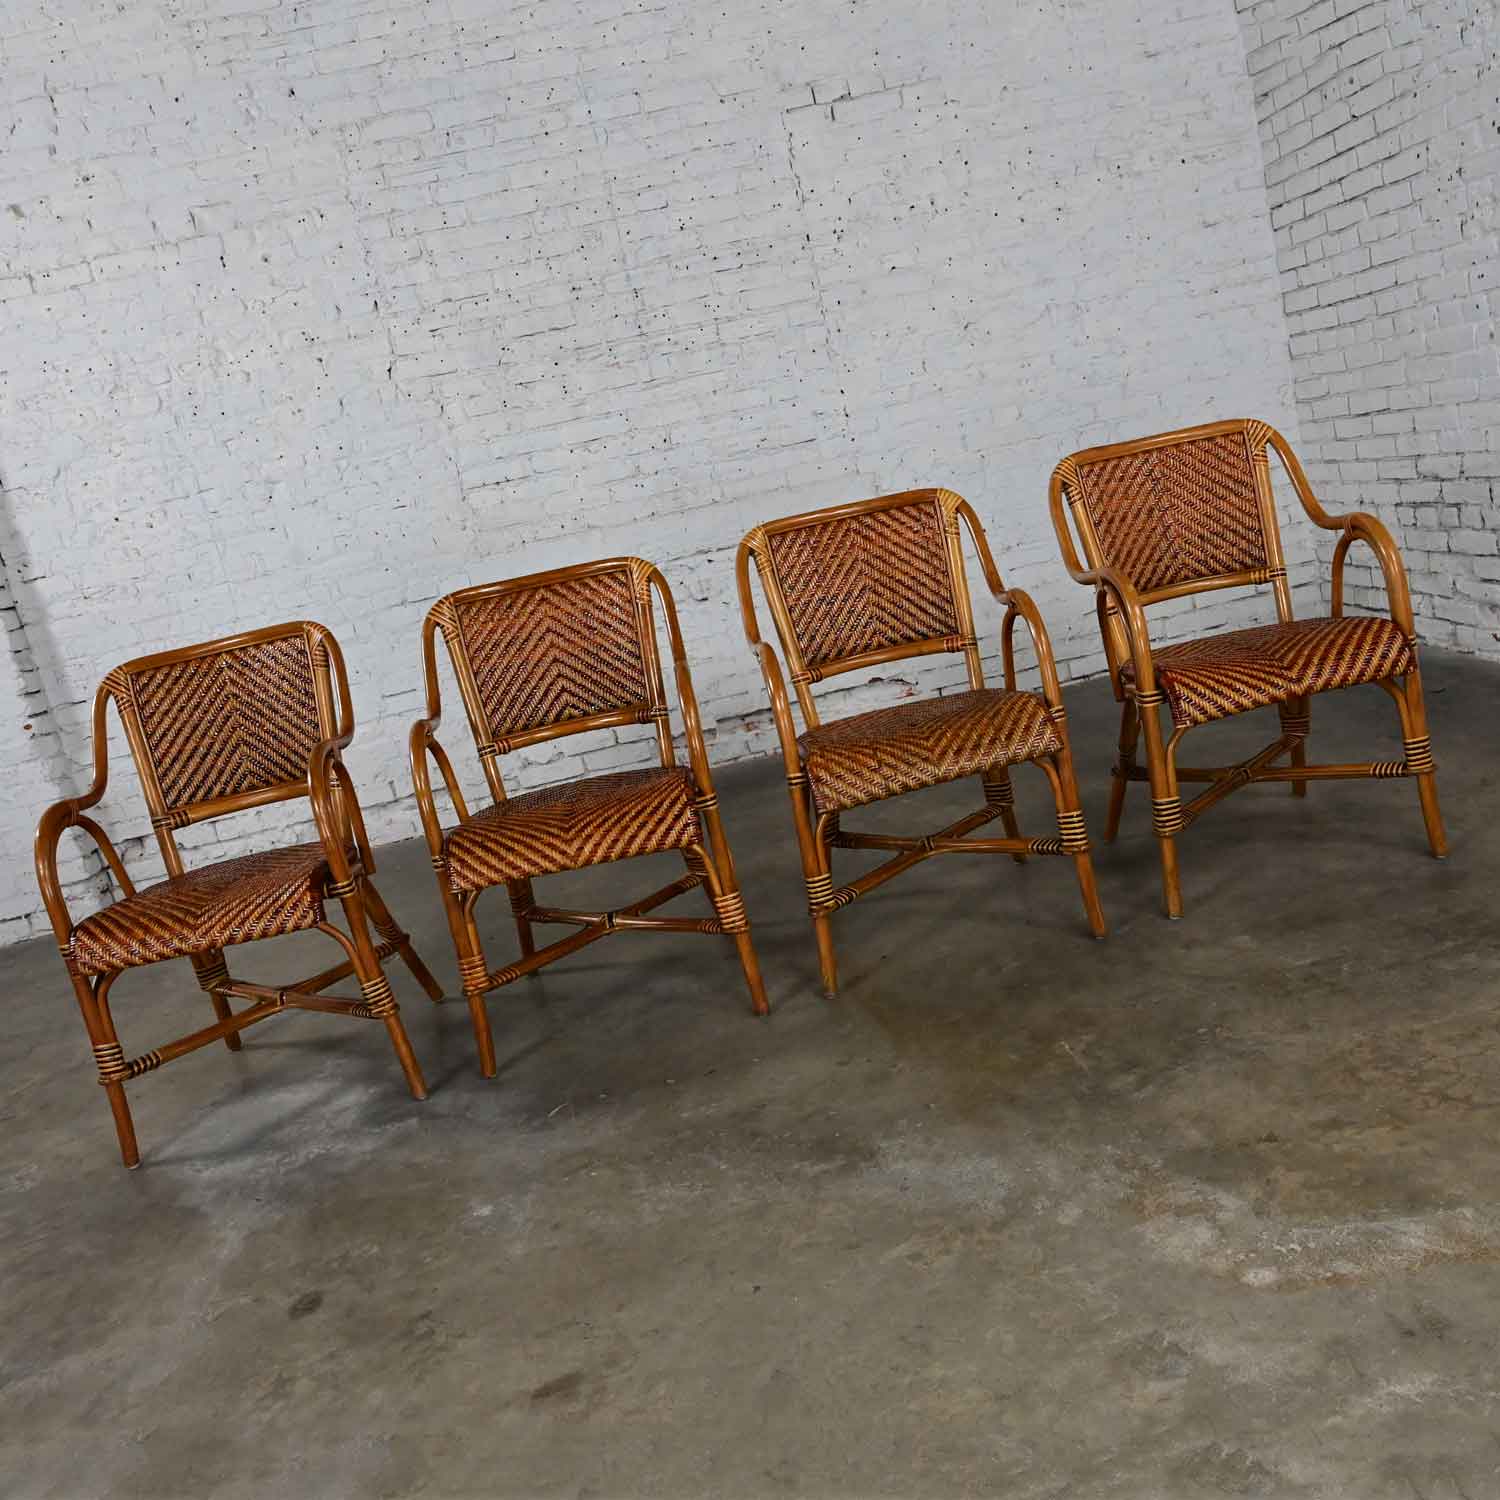 Late 20th Century Boho Chic 2 Toned Wicker Rattan Café Bistro or Conservatory Armchairs Set of 4